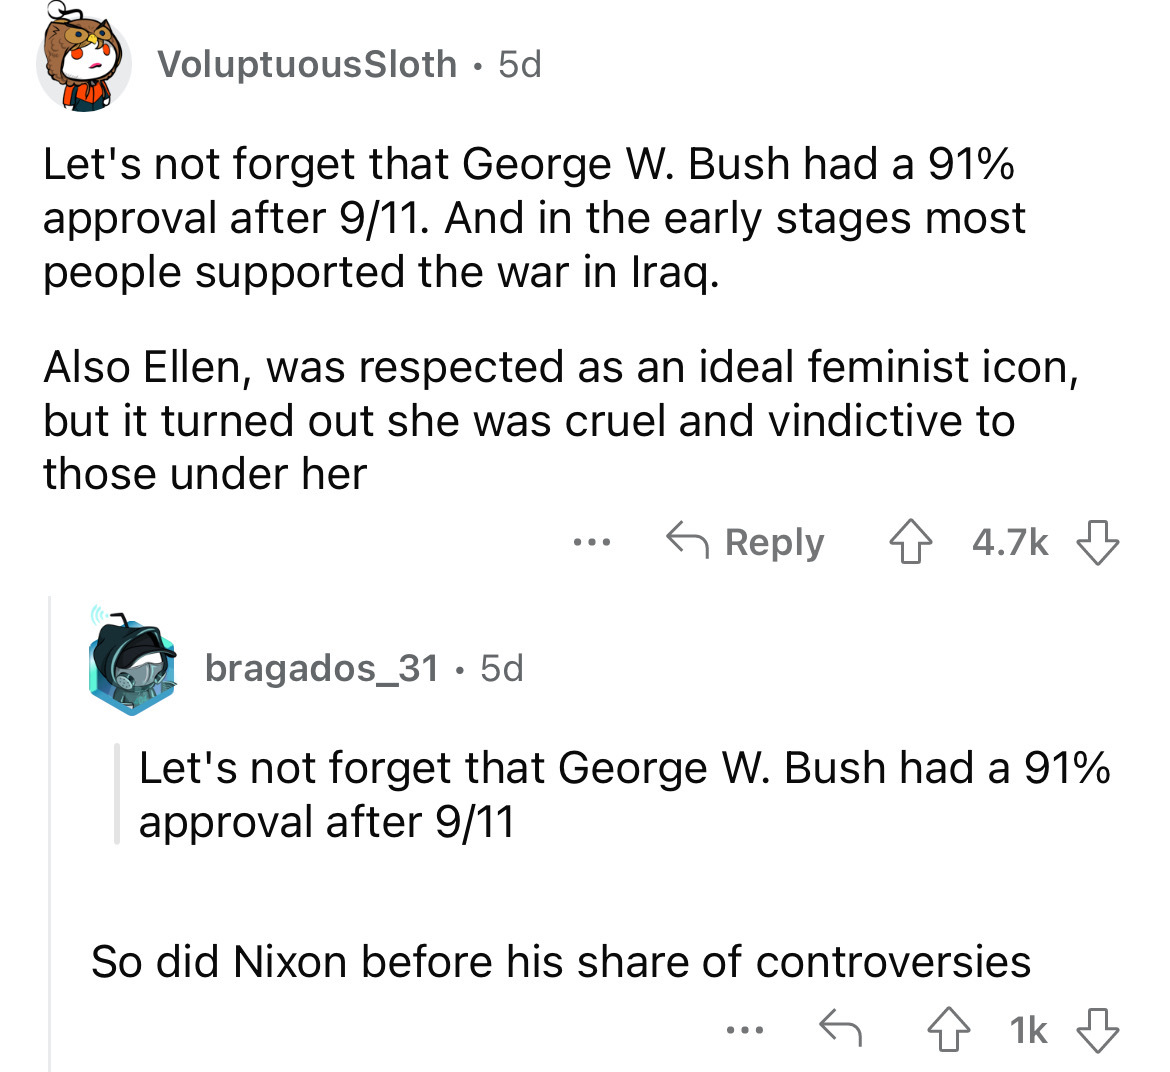 angle - VoluptuousSloth 5d Let's not forget that George W. Bush had a 91% approval after 911. And in the early stages most people supported the war in Iraq. Also Ellen, was respected as an ideal feminist icon, but it turned out she was cruel and vindictiv